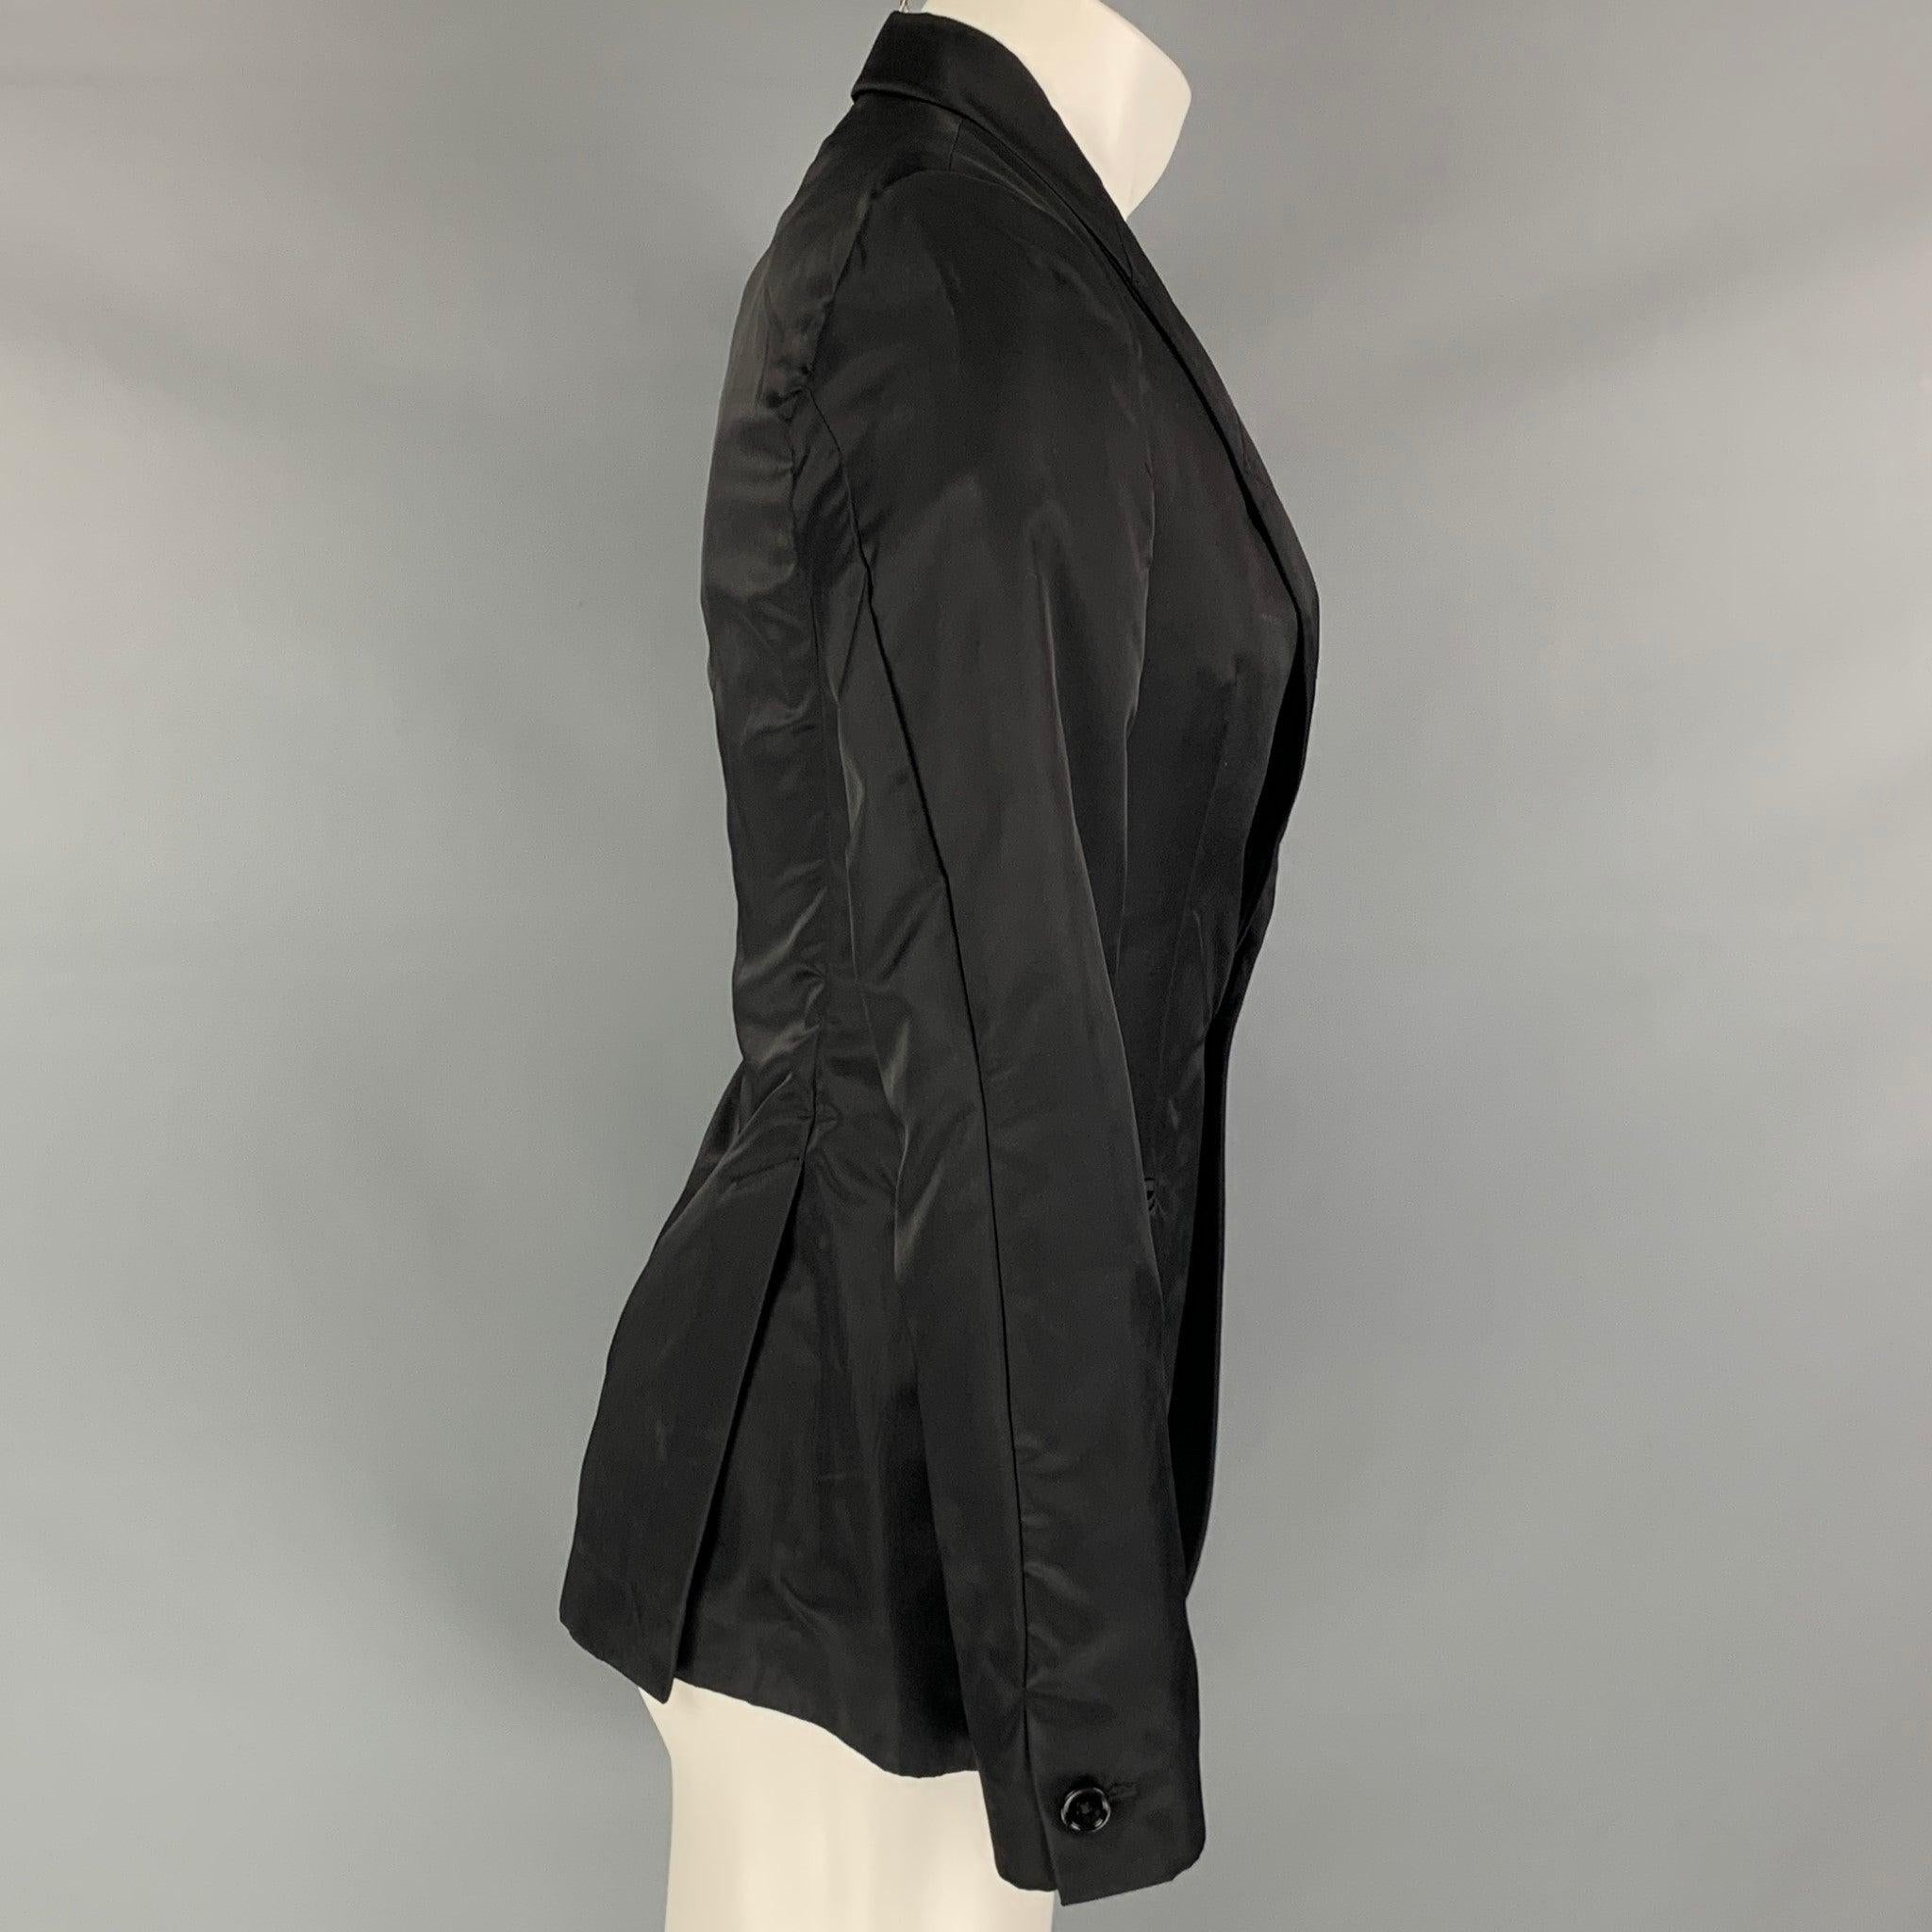 MIU MIU sport coat comes in a black woven material with a full liner featuring a shawl collar, slit pockets, double back vent, shoulder pads, and a single button closure. Made in Italy.Good Pre-Owned Condition. Tags removed and minor signs of wear.